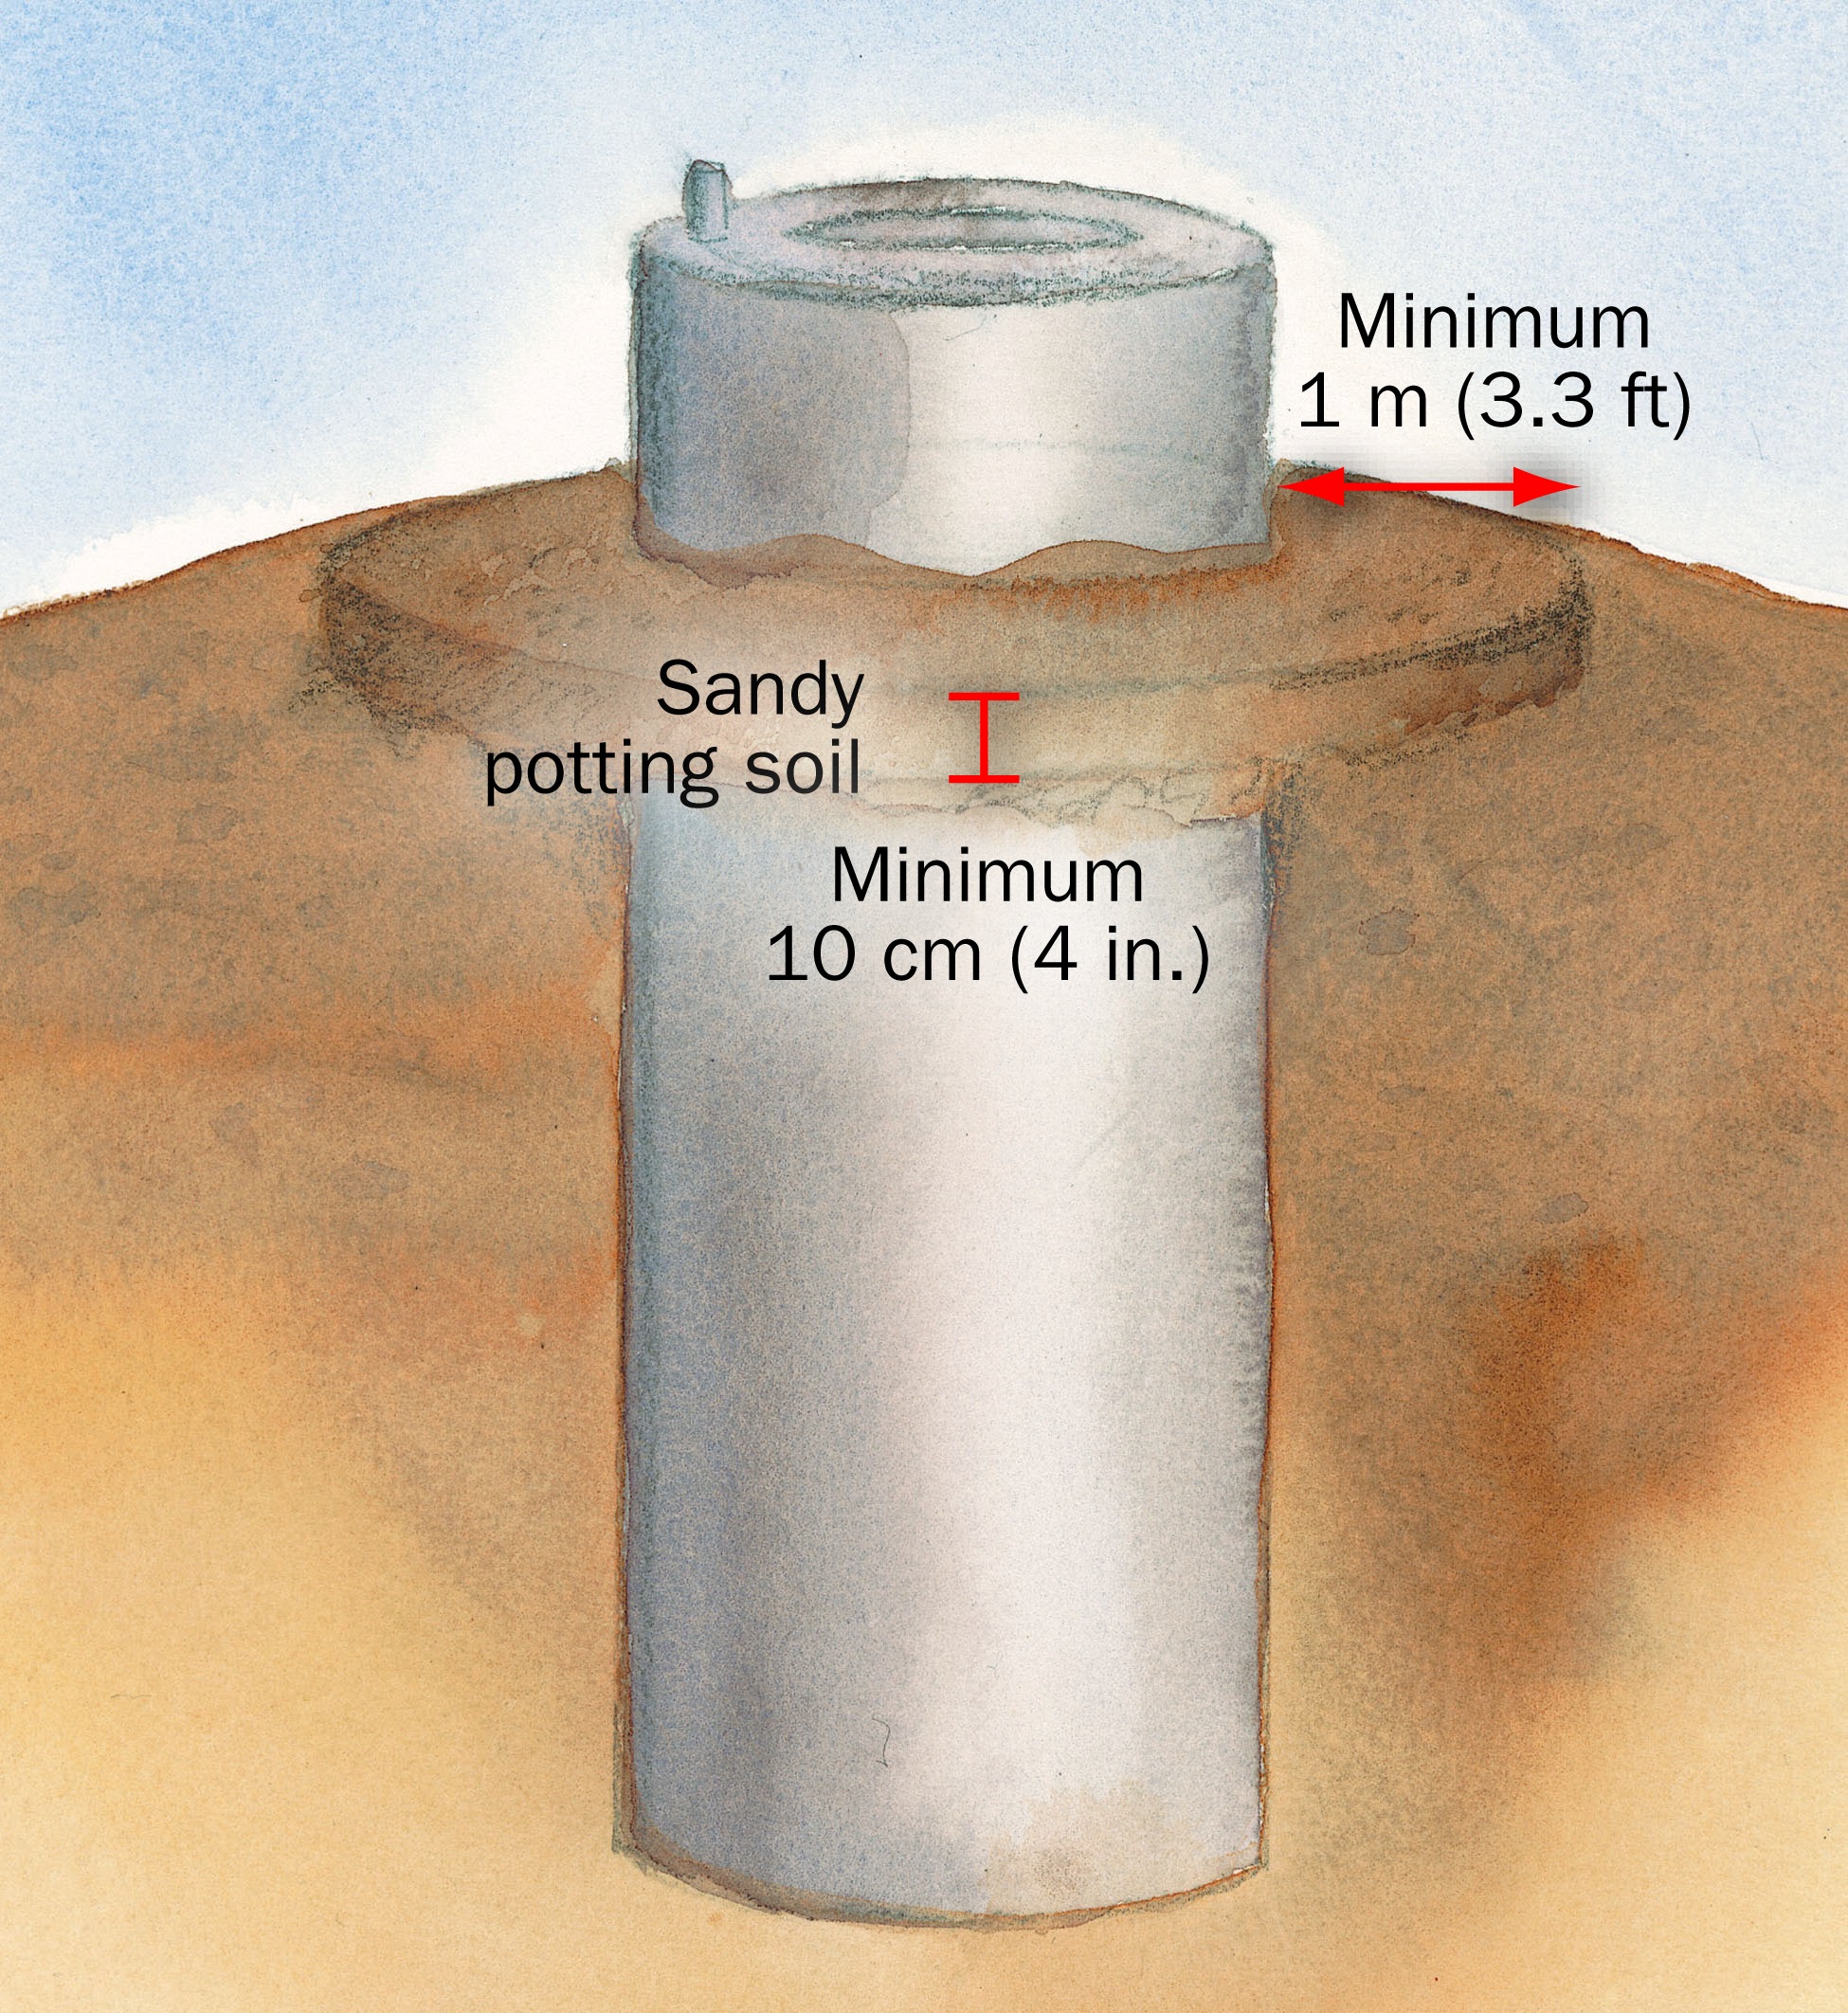 This is a schematic of a disposal vessel installed below ground showing a ring of sandy potting soil like a donut around the vessel at the surface giving a place for larvae to pupate.